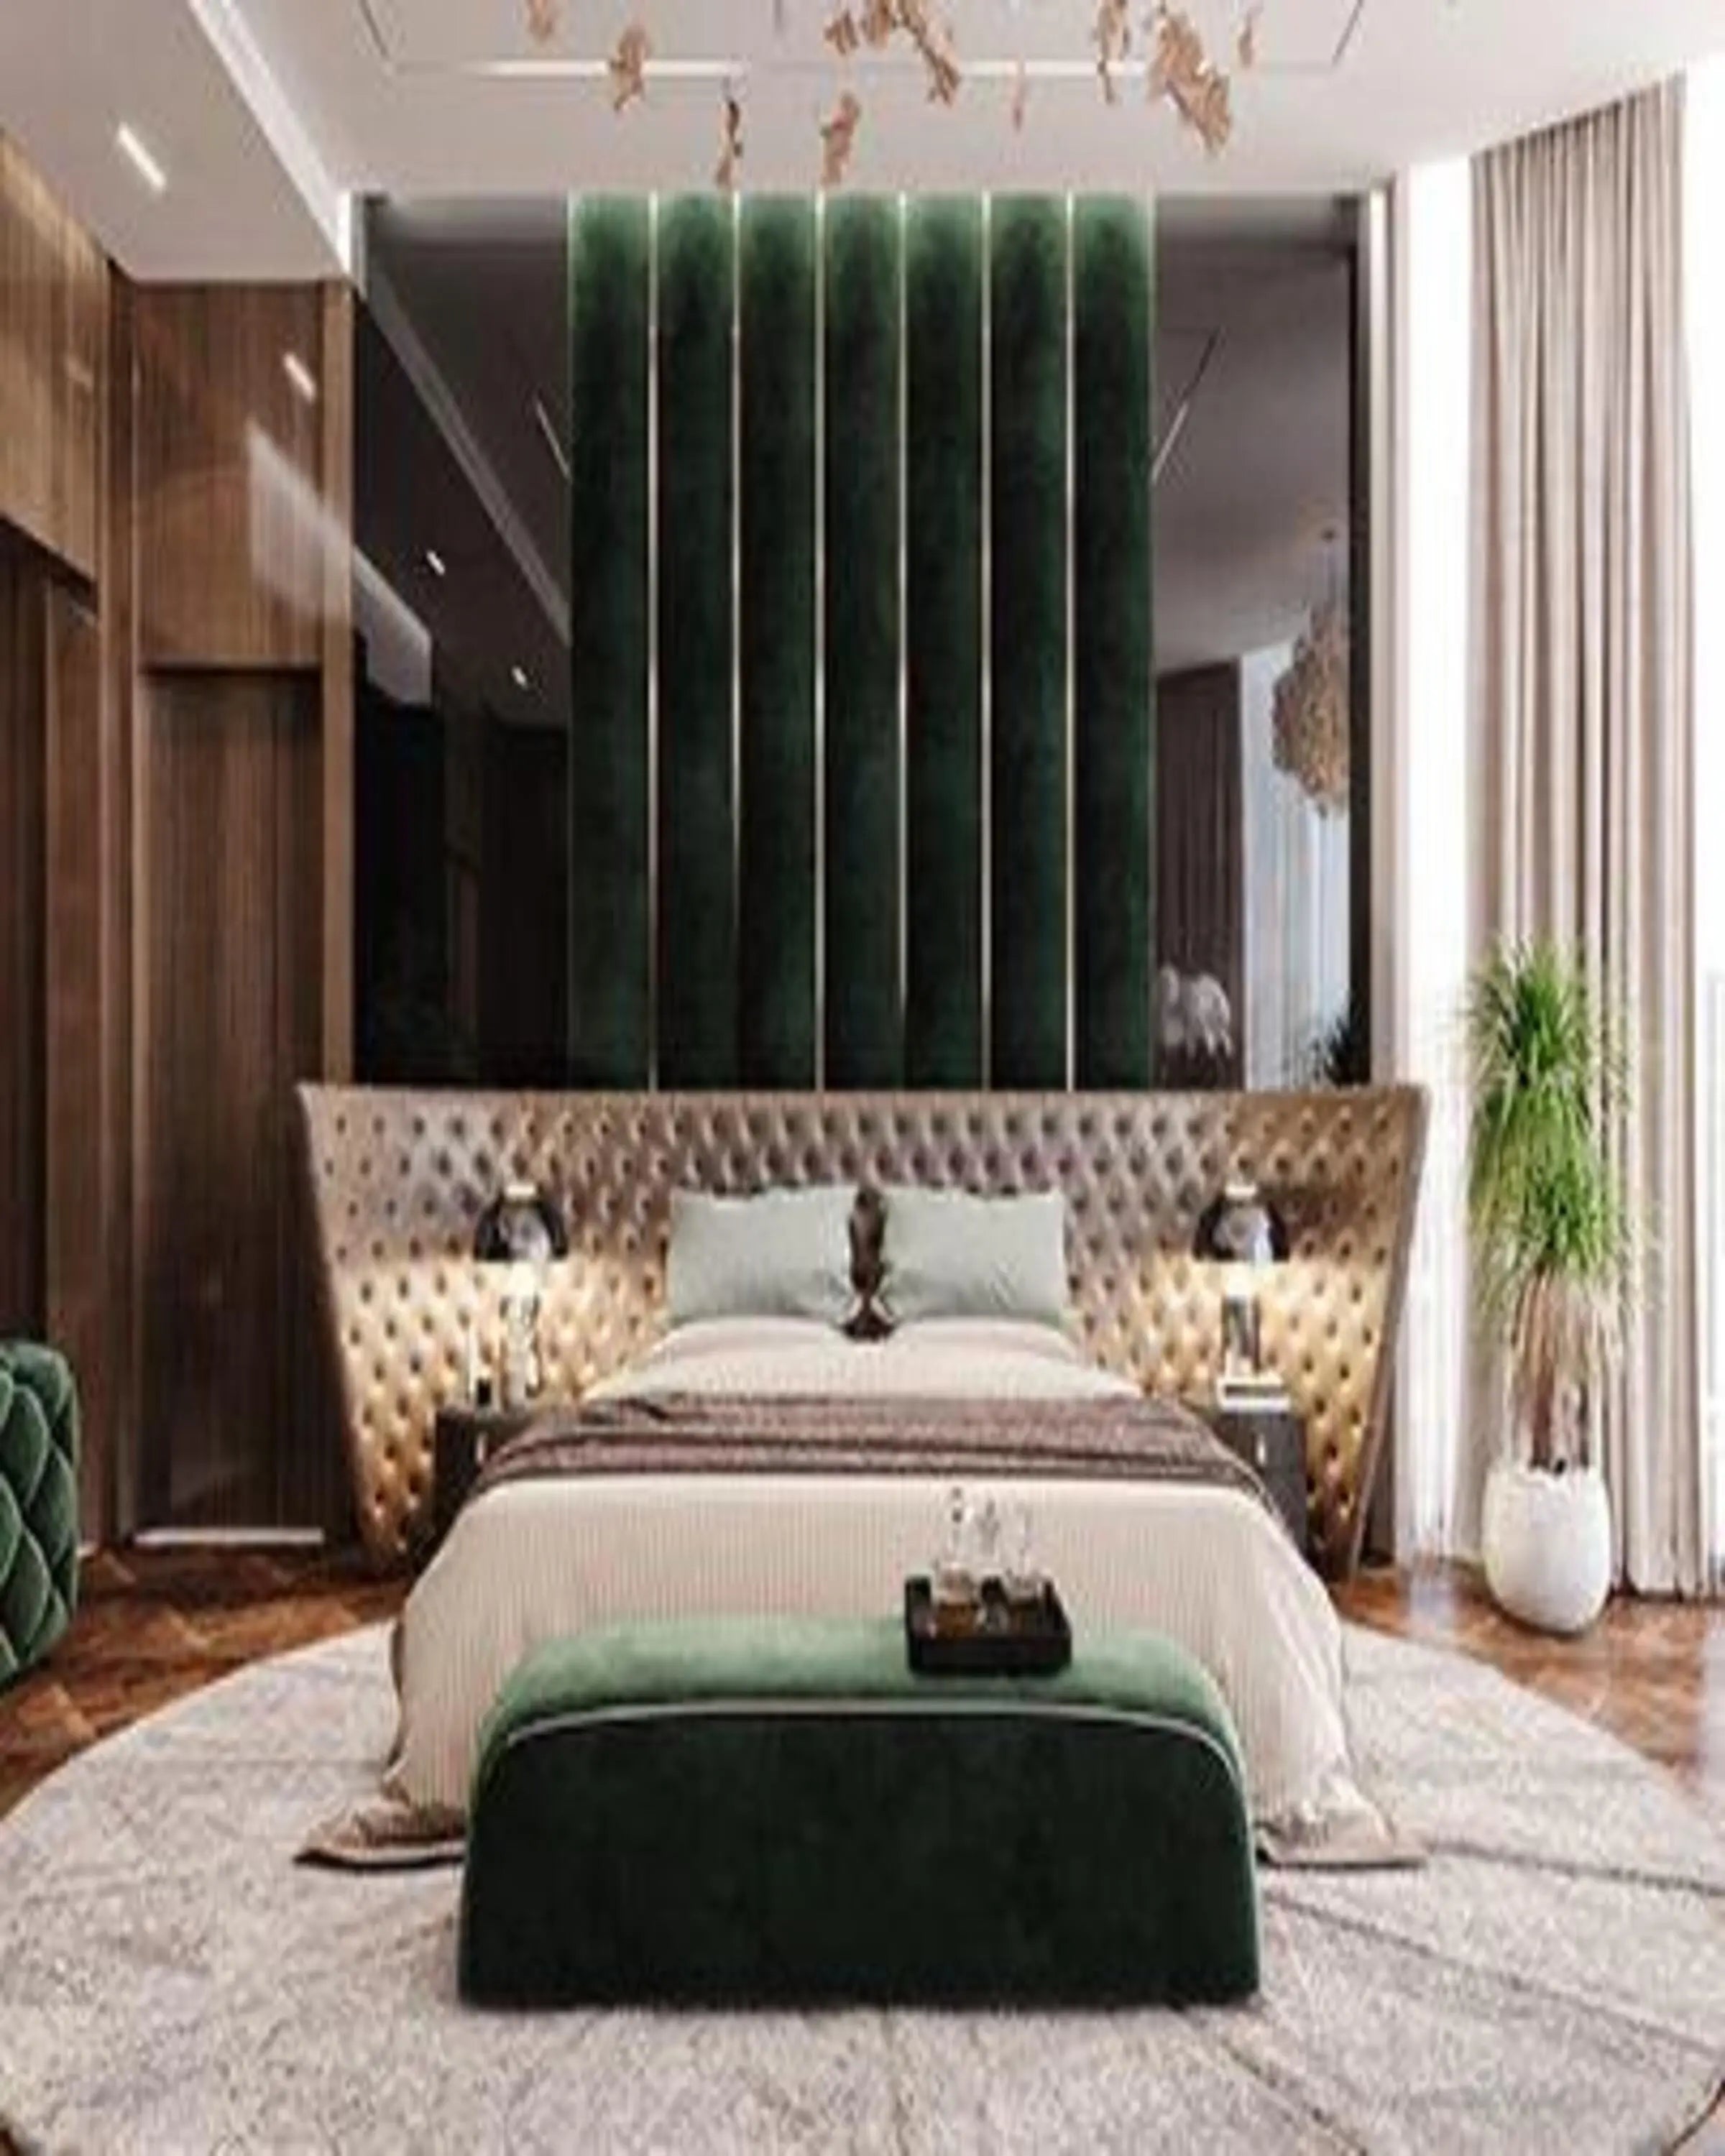 Shia Green Velvet Luxury Bed With High Headboard ANGIE HOMES